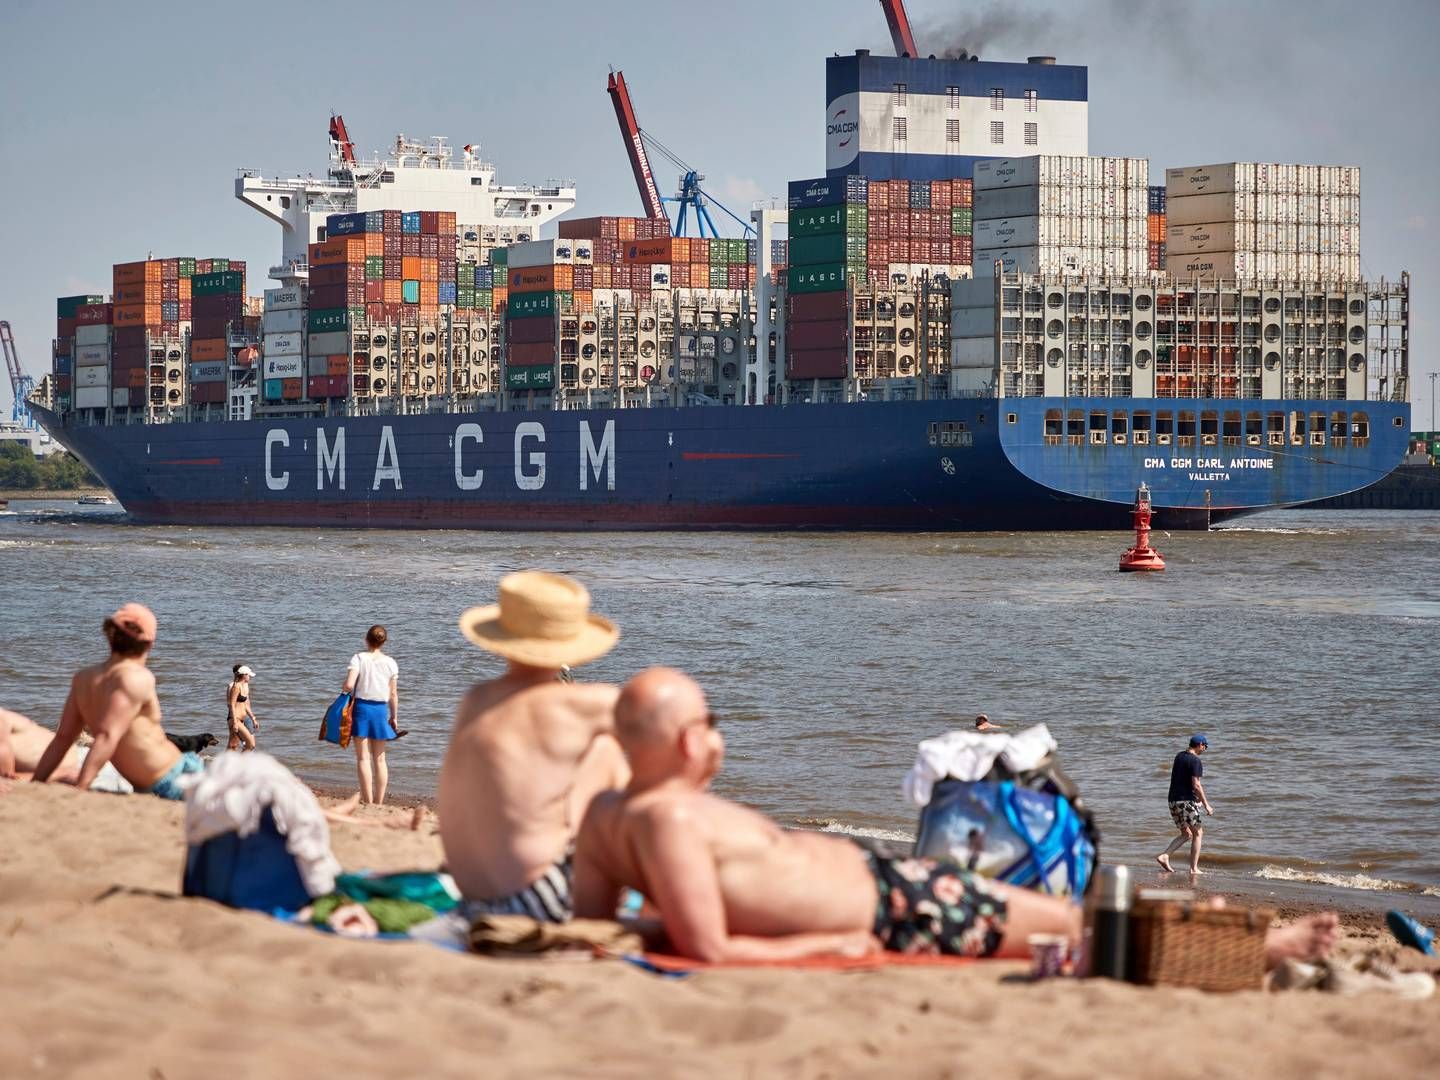 A tax on CO2 emissions and the shipping industry's goals to cut its carbon footprint are key topics at the upcoming climate summit. | Photo: Georg Wendt/AP/Ritzau Scanpix